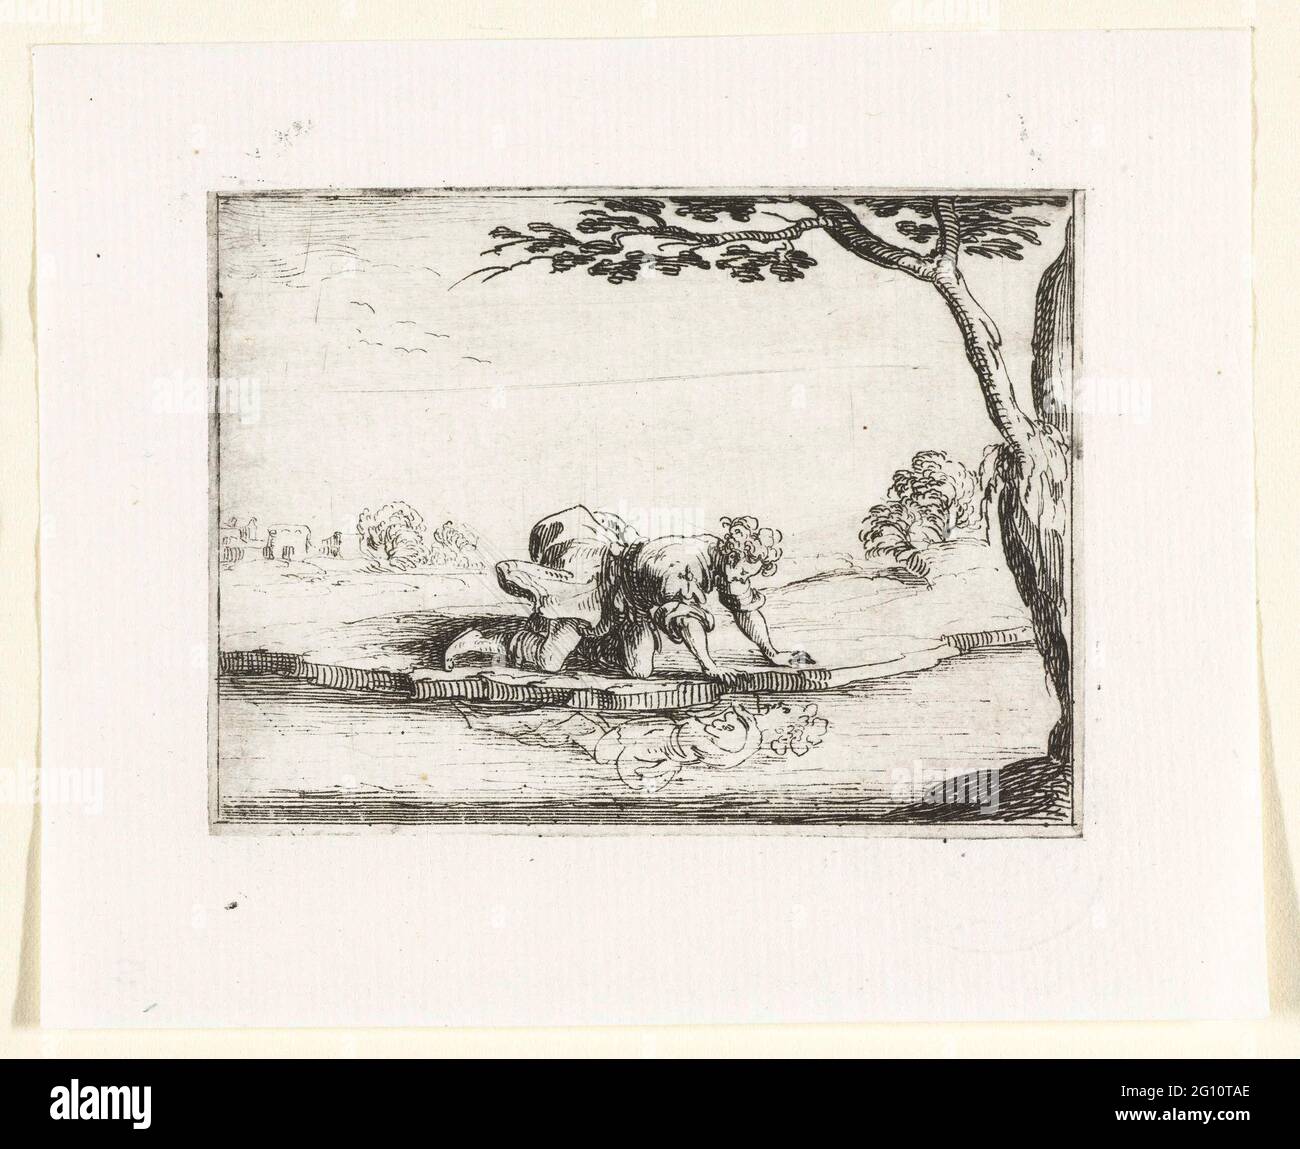 Narcissus admires his mirror image in the water; Monastery life in emblems. Presentation of a young man (Narcissus) looking at his own mirror image at a waterfront. This magazine is part of the emblem series 'monastic life in emblems'. In addition to an illustrated title page and 26 emblems, the second state of this series contains a title page and a blade with assignment, both in letterpress without image. Stock Photo